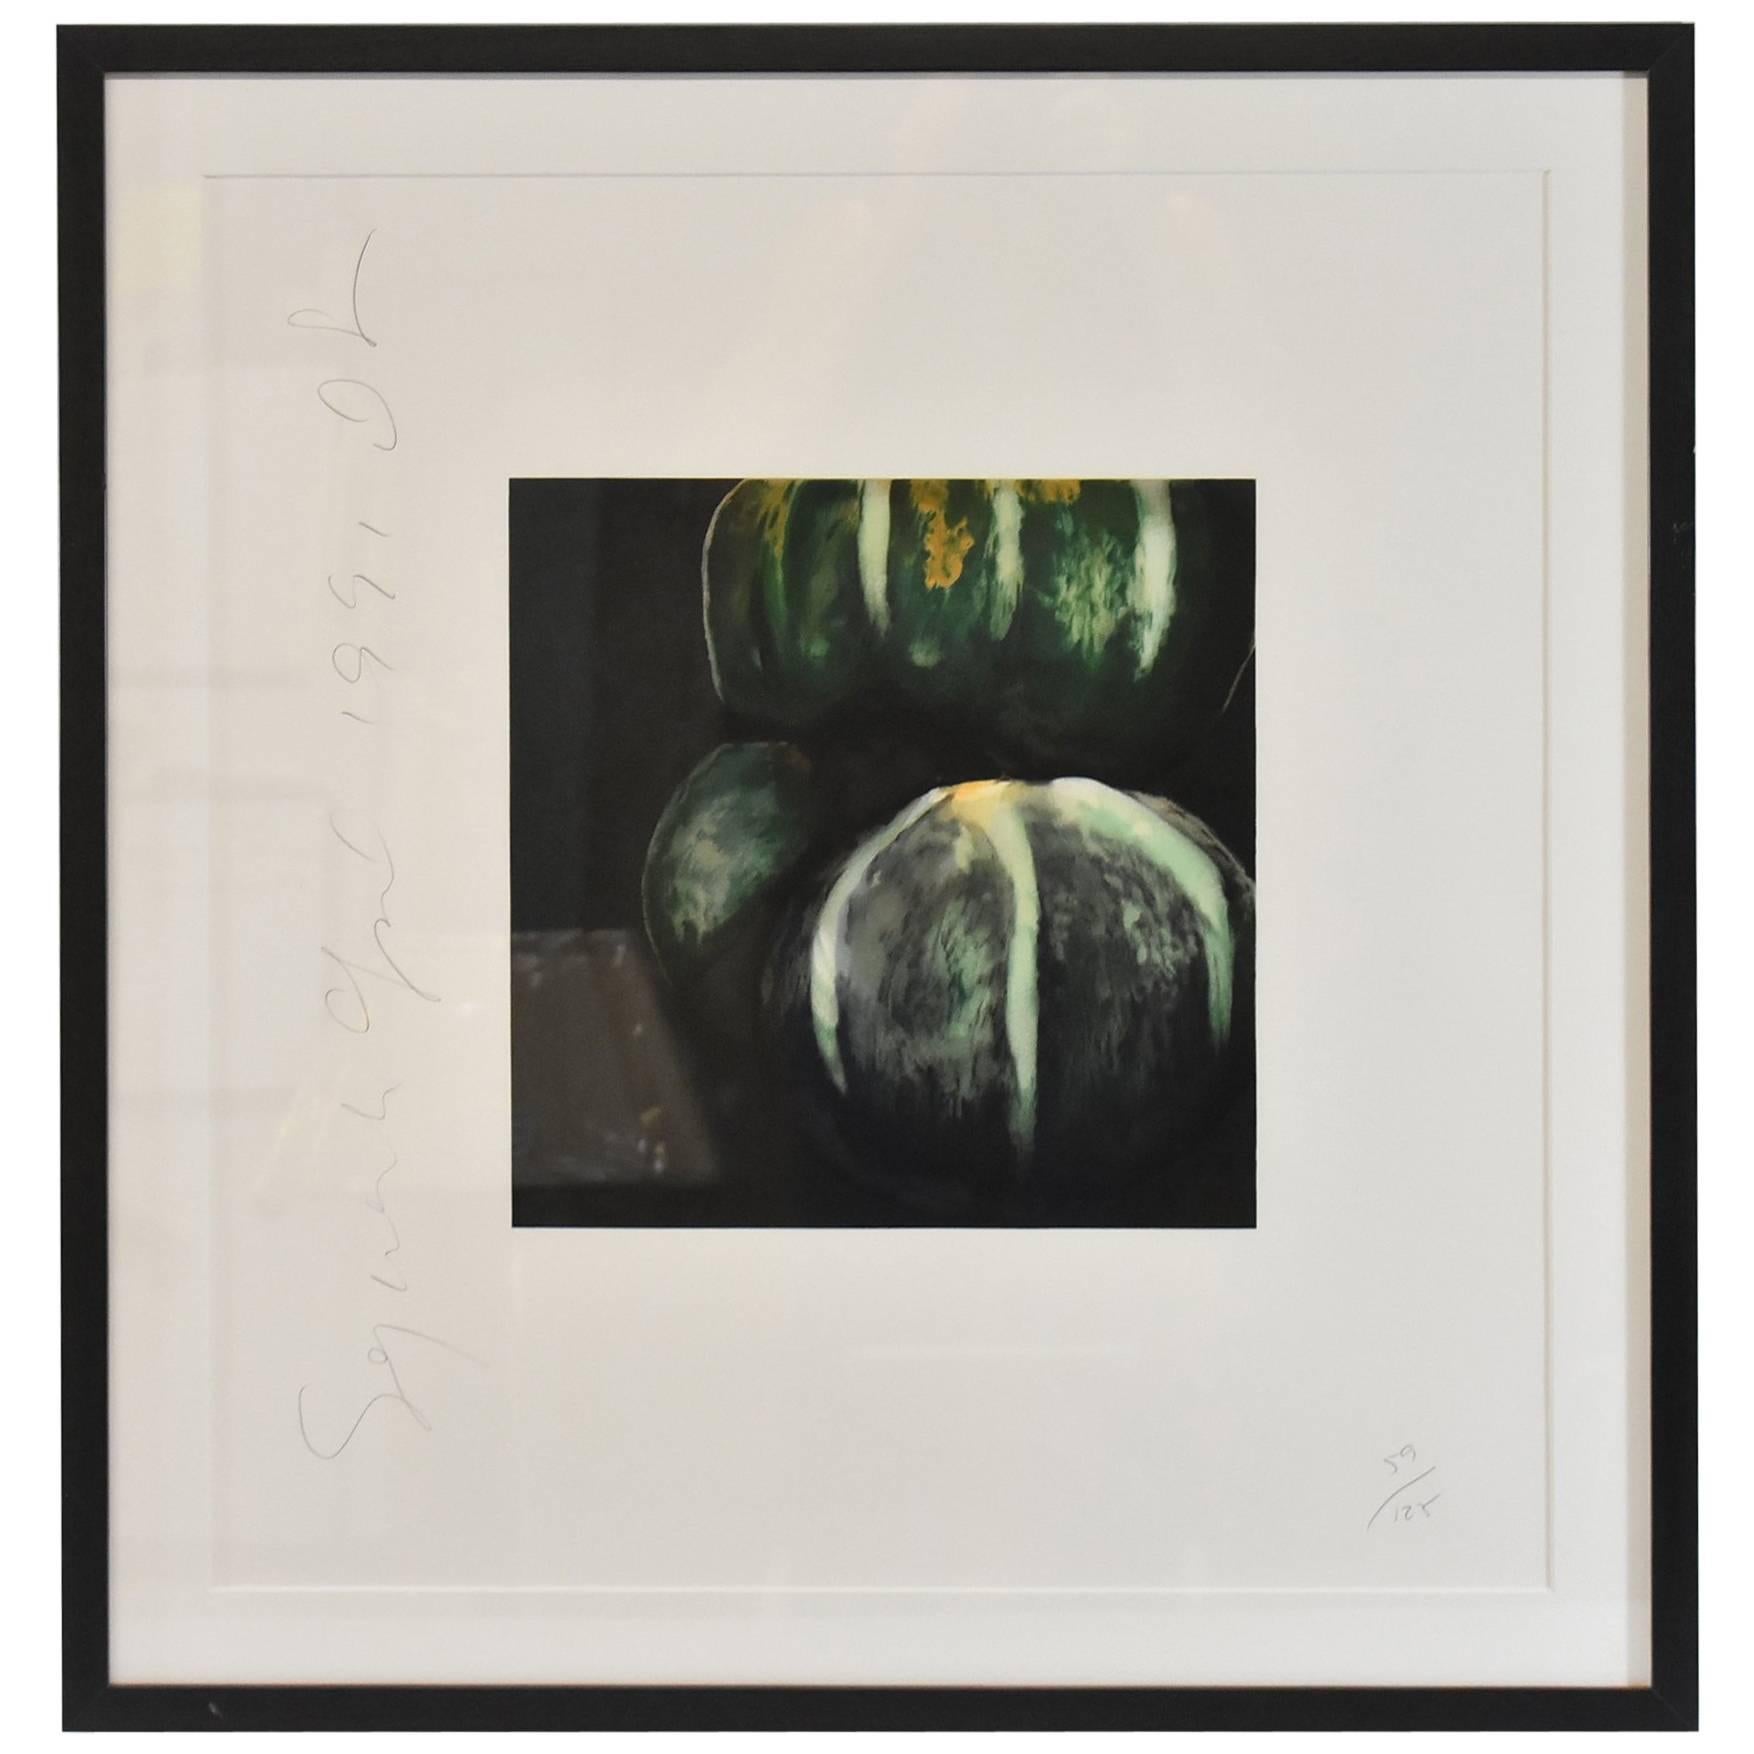 Donald Sultan Print, "Squash' Signed and Numbered 59/125, 1991